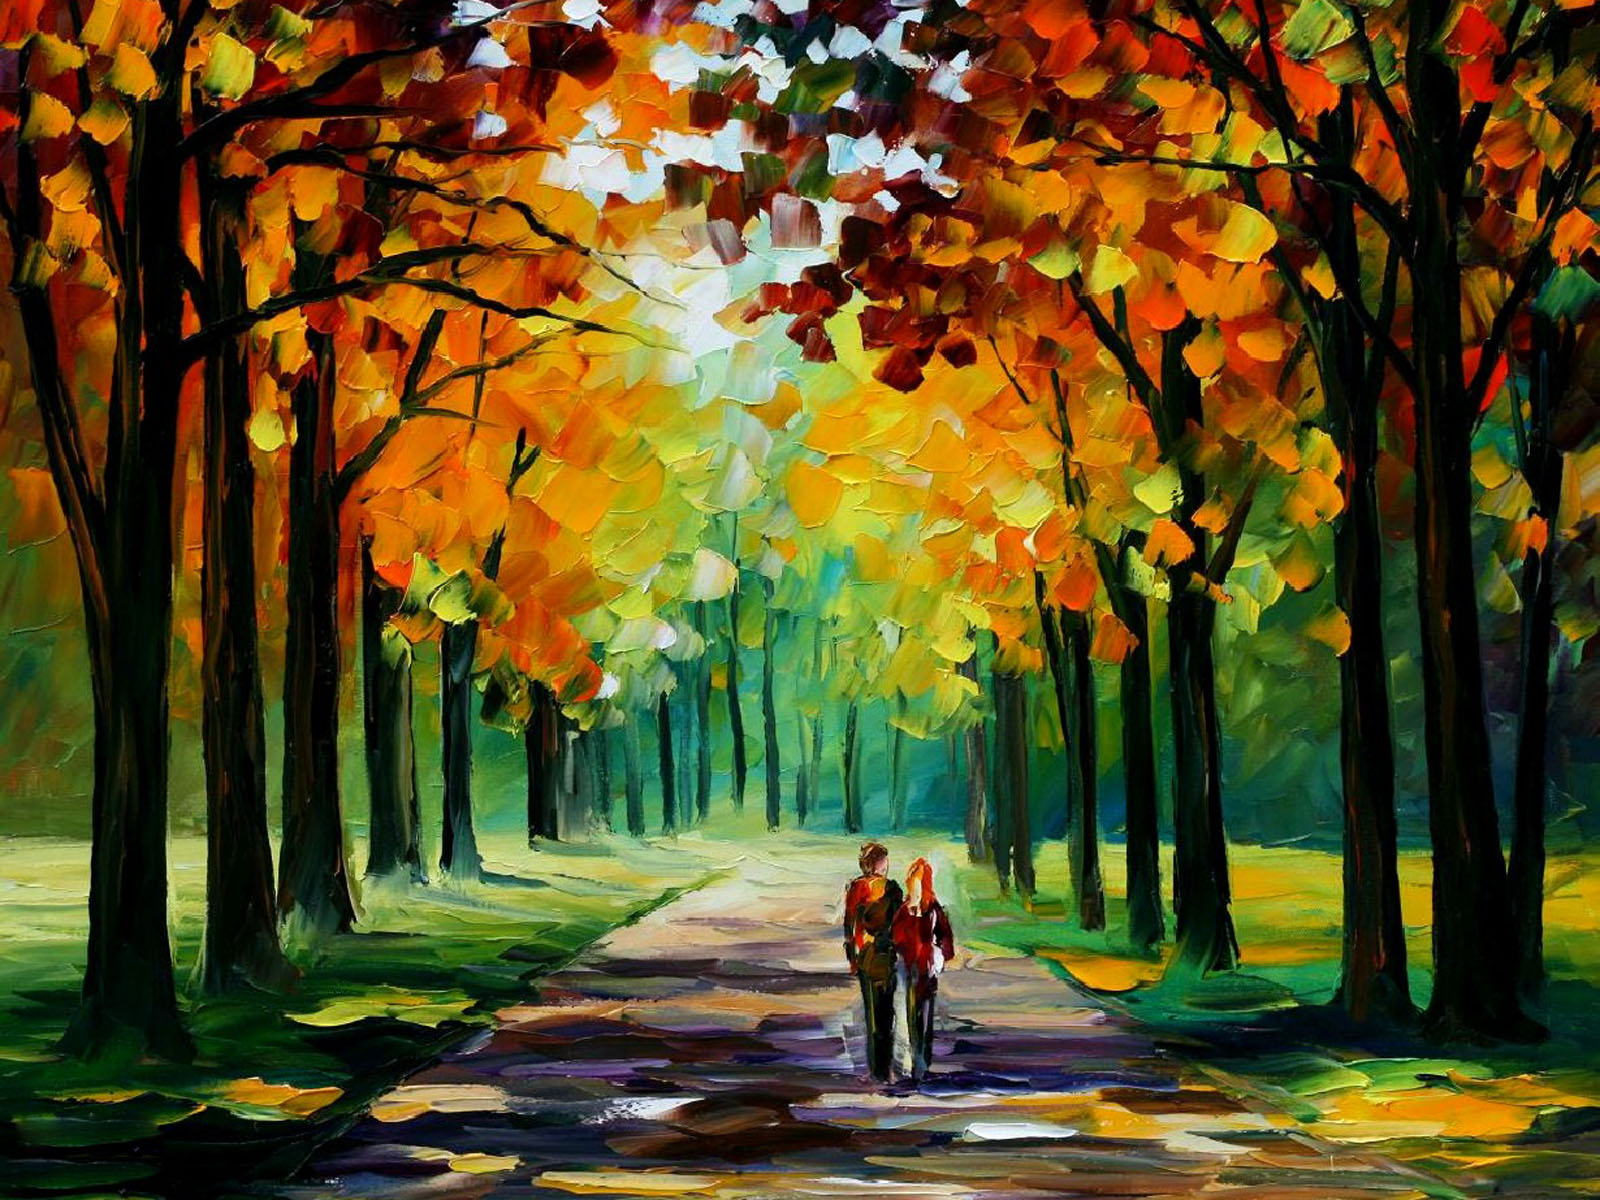 oil painting wallpaper hd,natural landscape,people in nature,painting,tree,nature